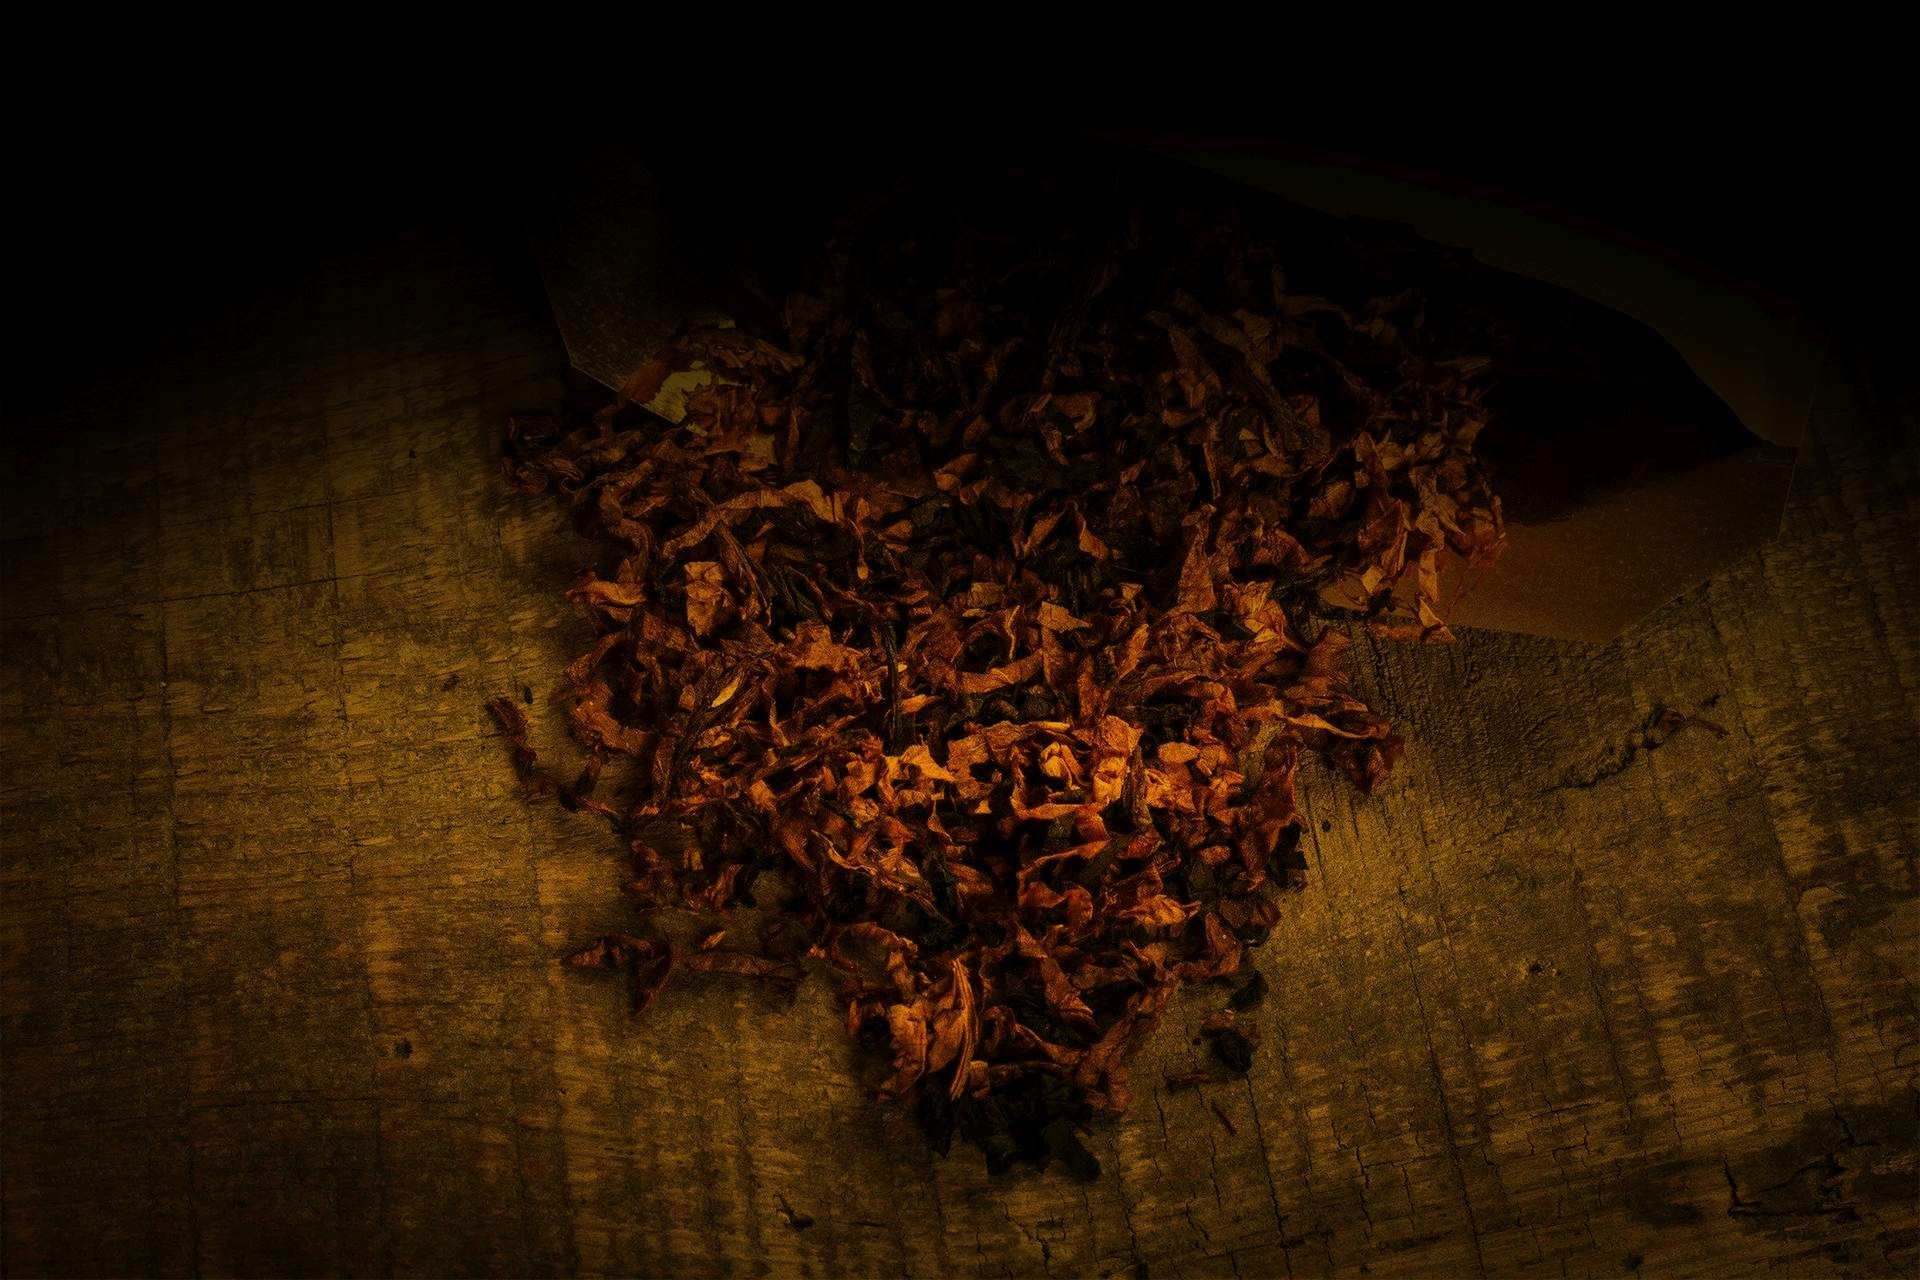 Tobacco of the highest quality